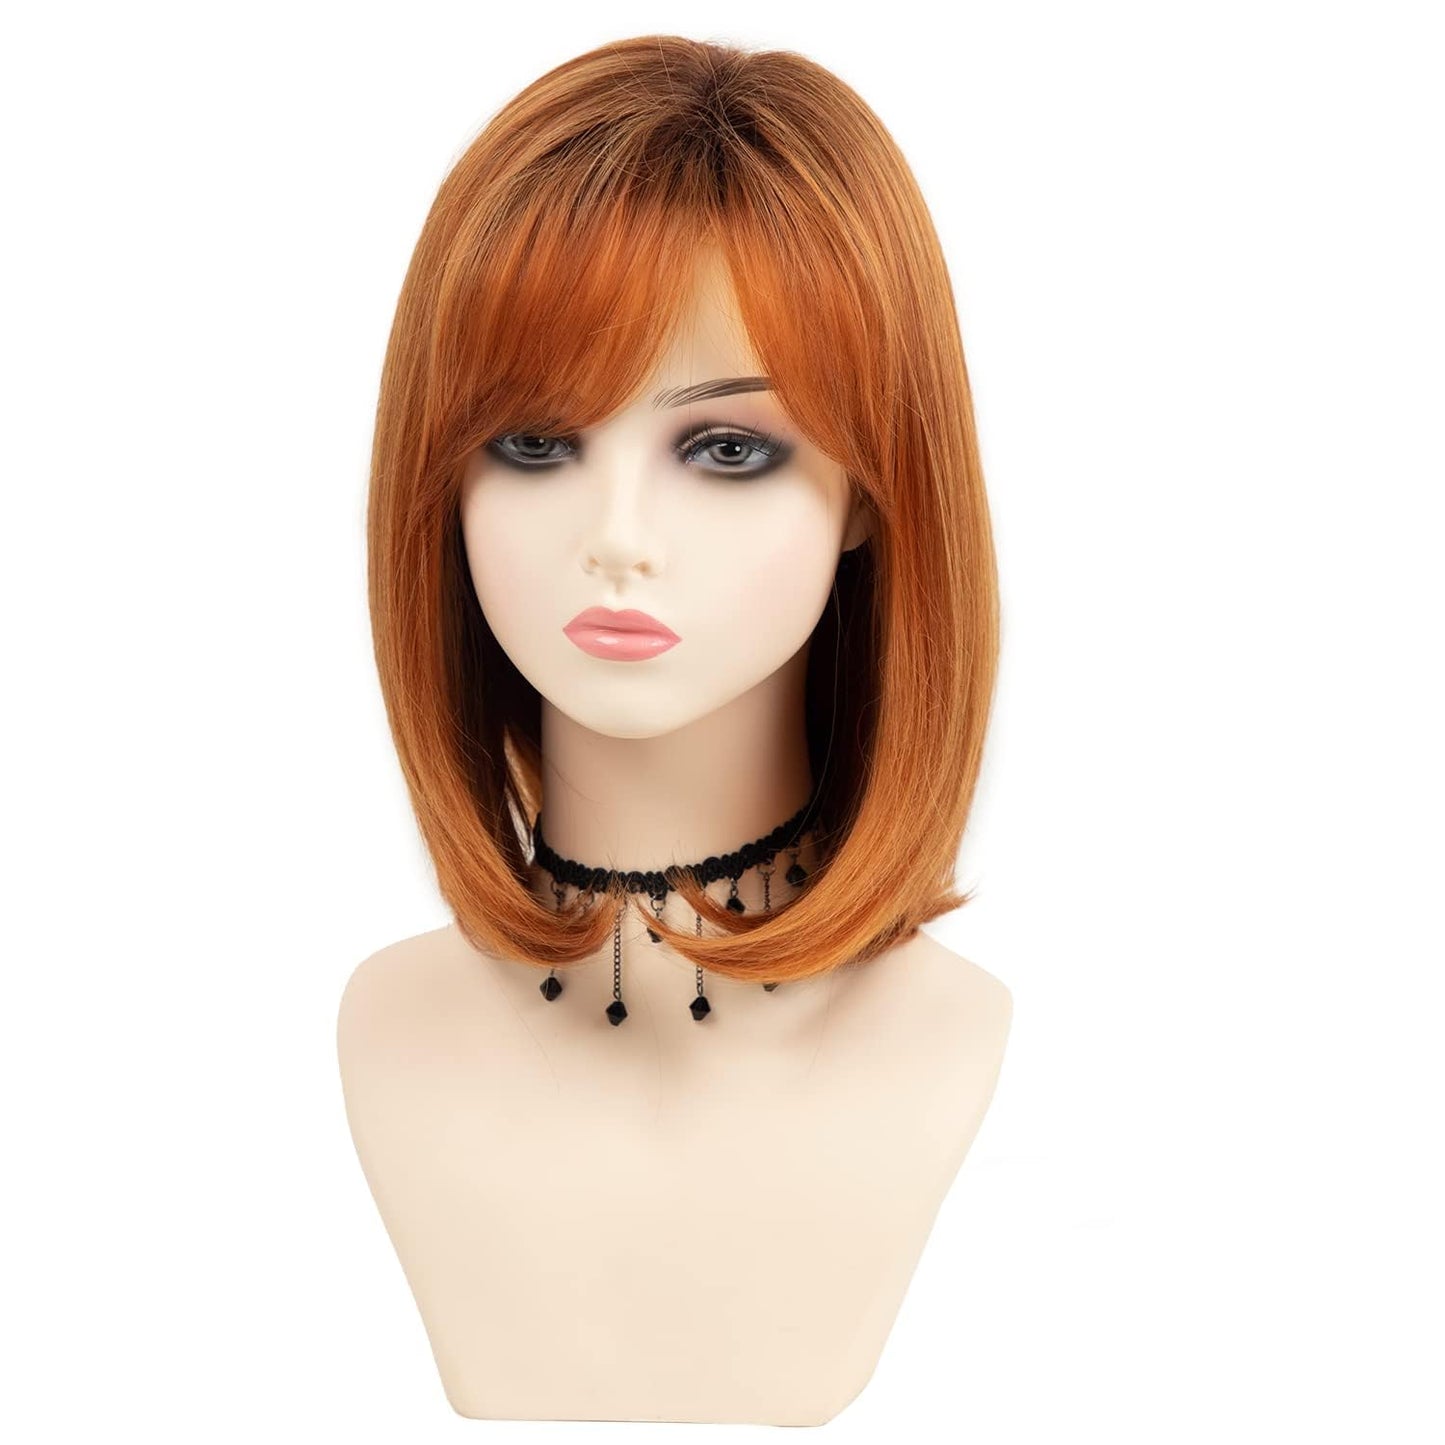 Short Ombre Orange Bob Wig with Bangs Ombre Orange Mixed Auburn Highlight Straight Hair Wigs for Women Medium Length Heat Resistant Synthetic Hair Wig for Cosplay Part